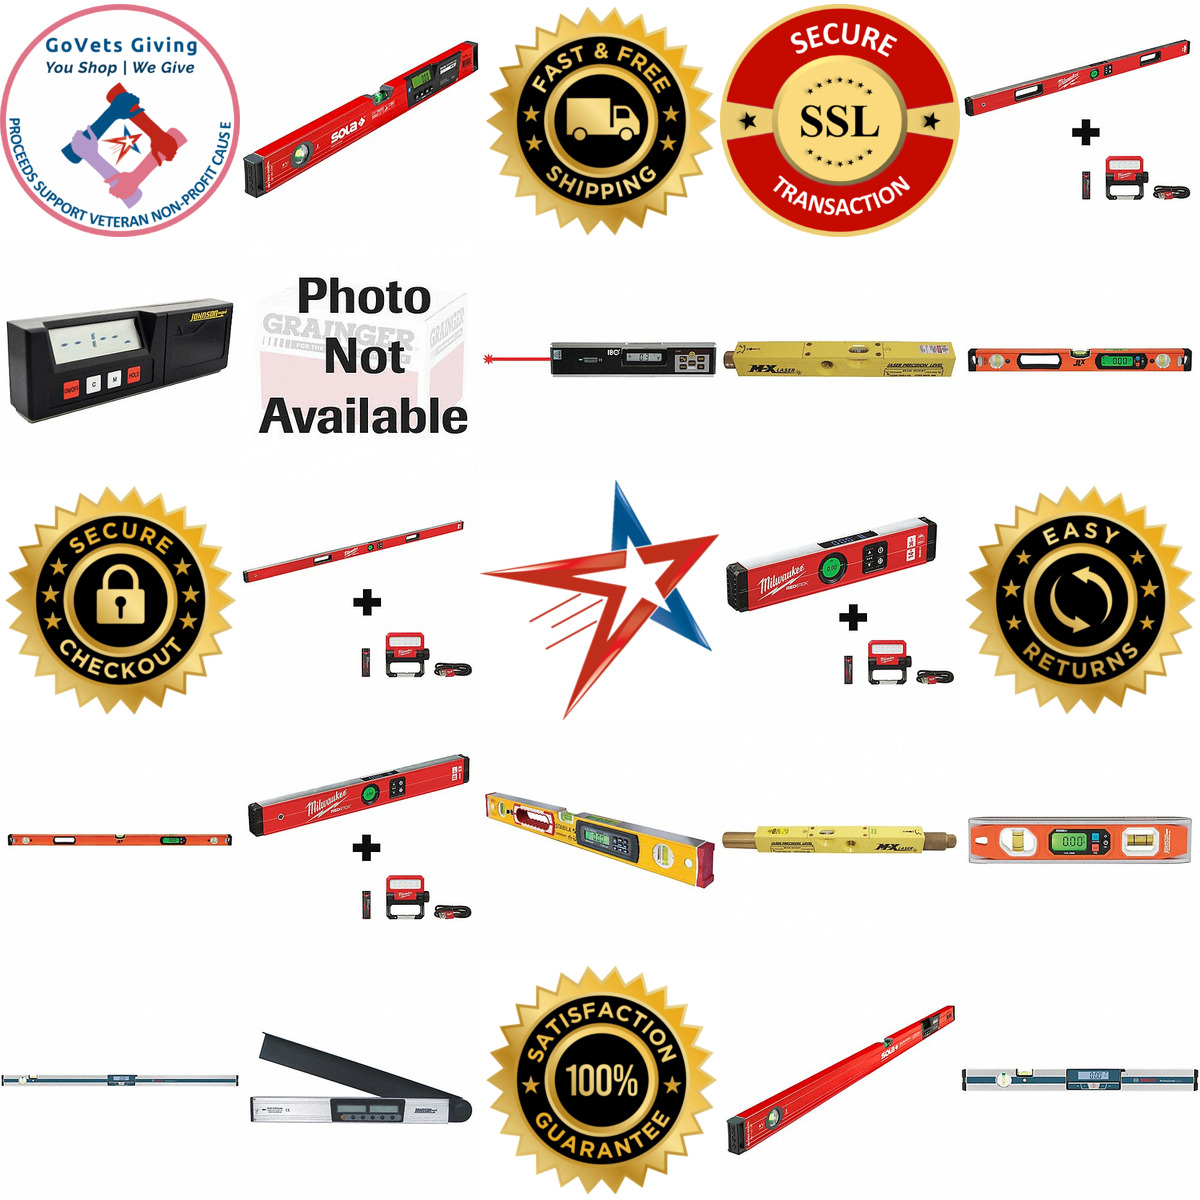 A selection of Electronic and Laser Leveling Kits products on GoVets